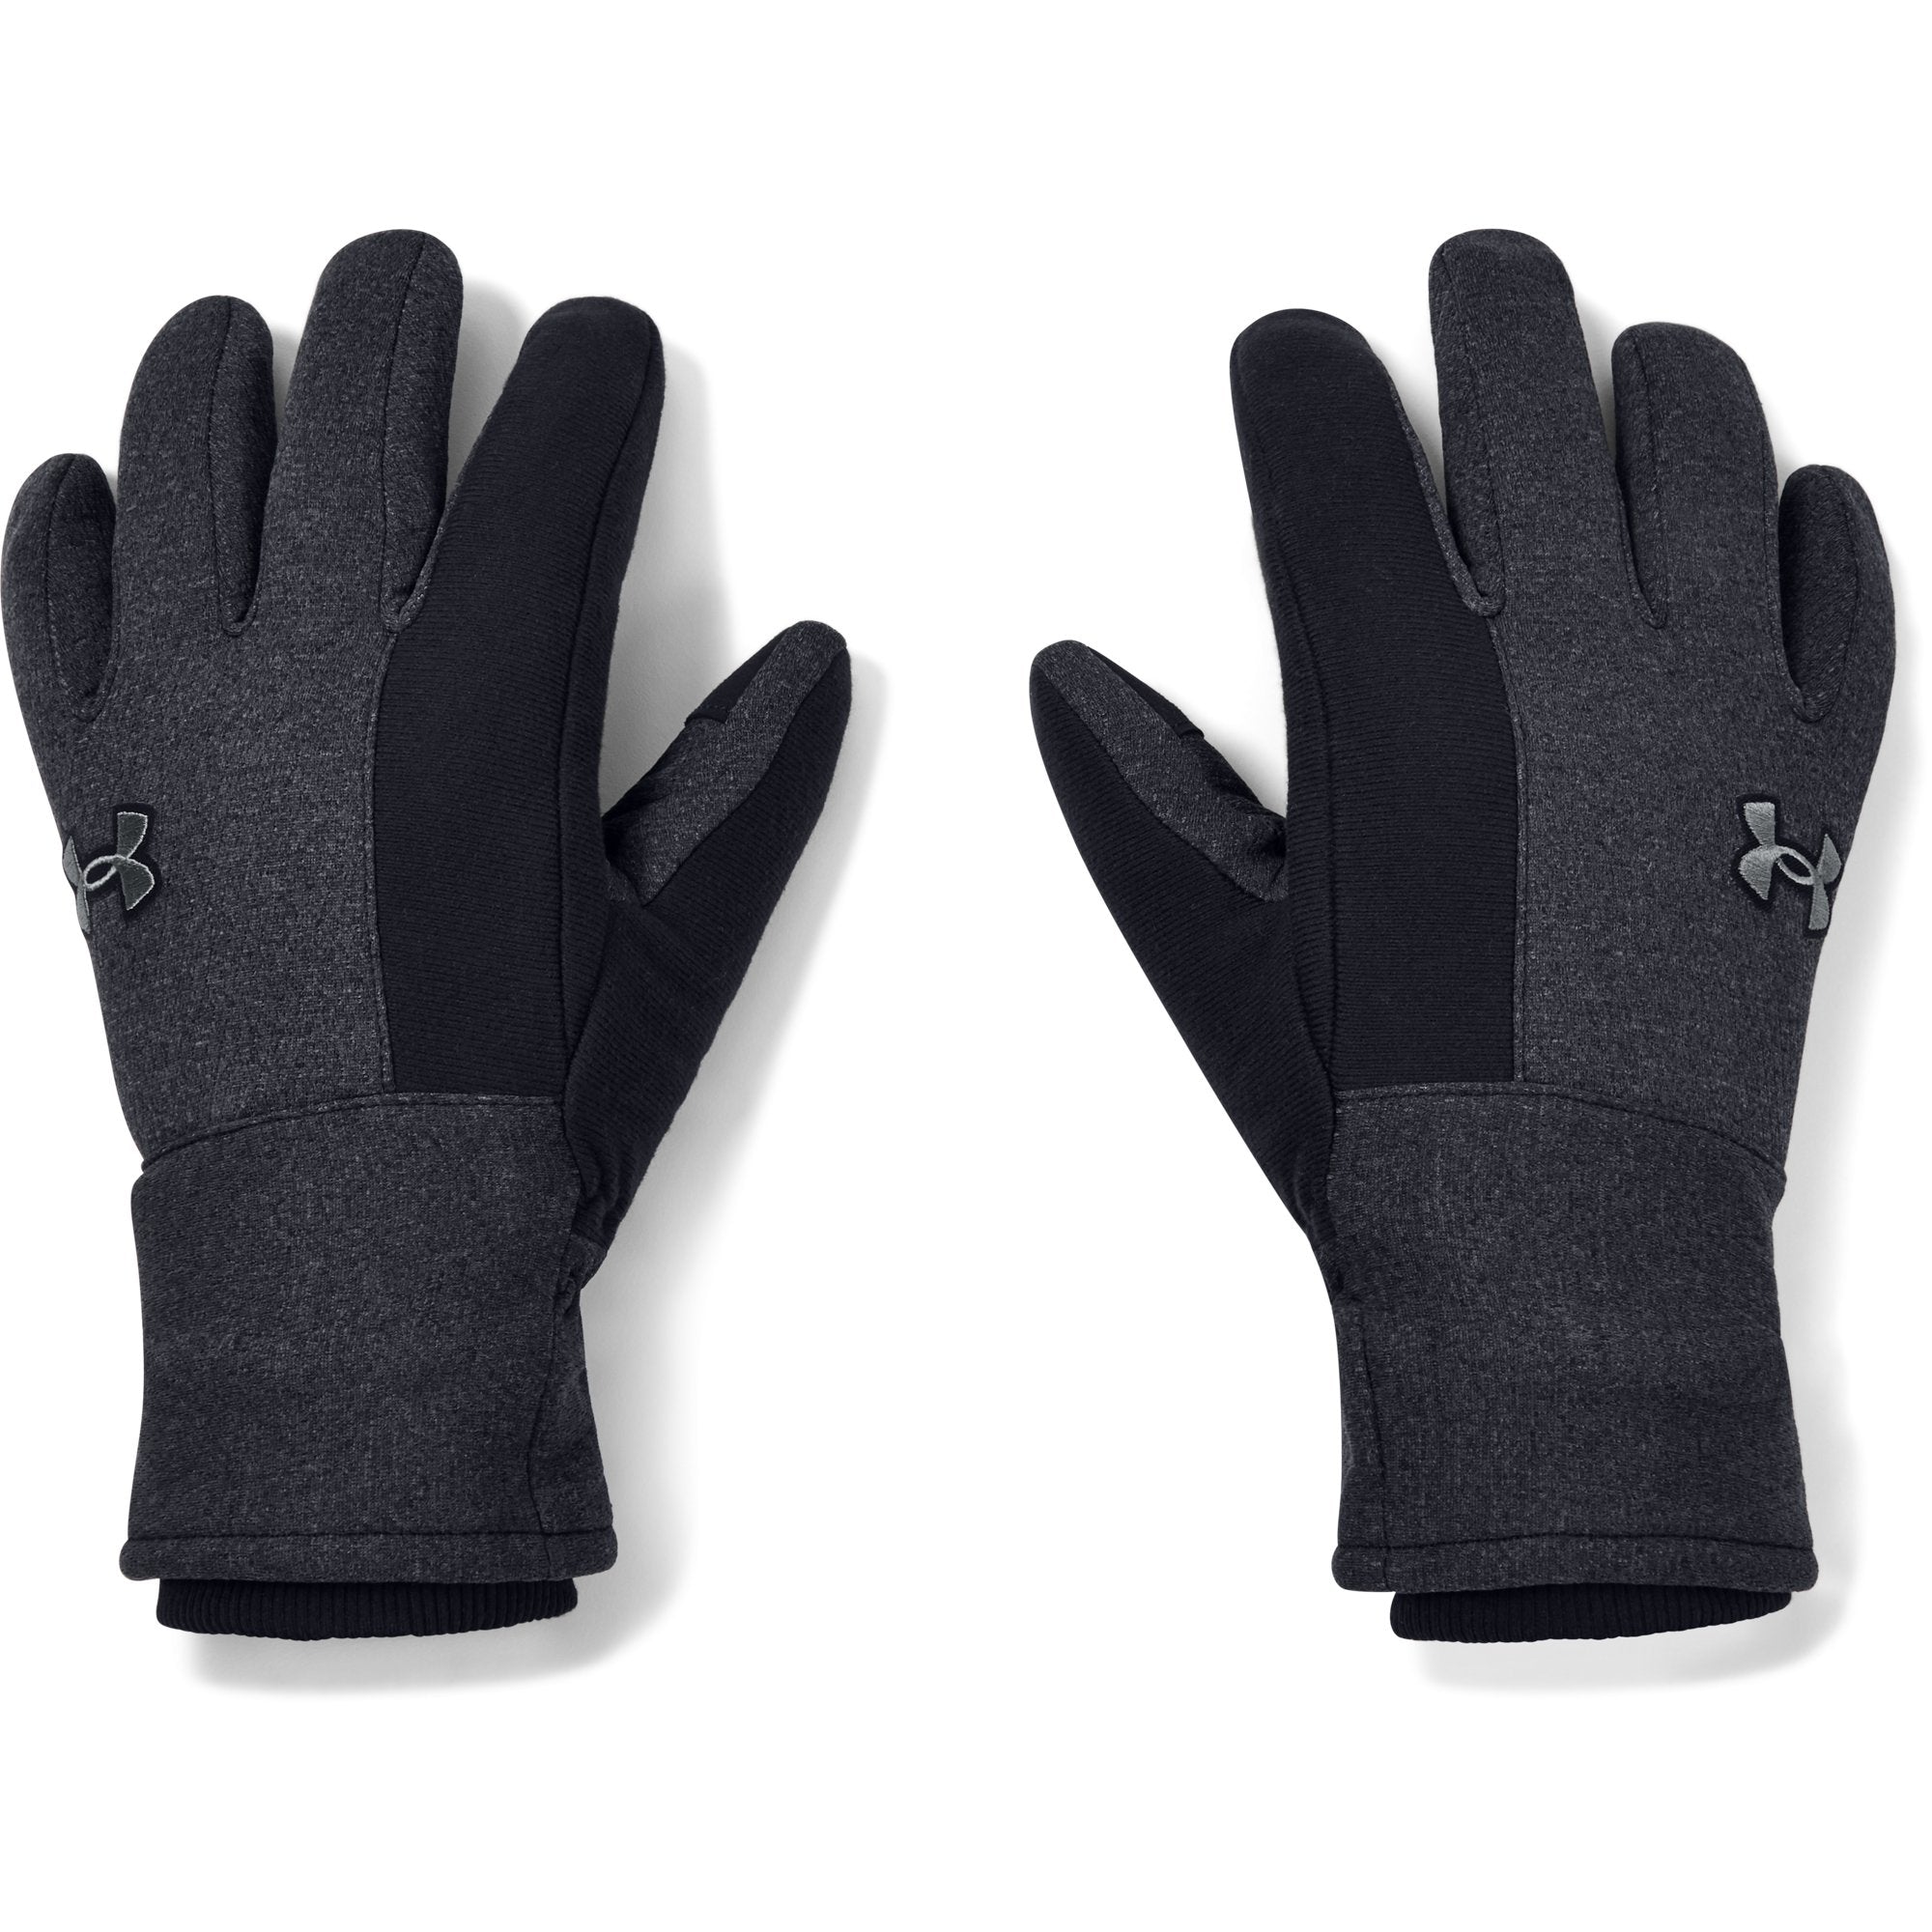 [1356695-001] MENS UNDER ARMOUR STORM GLOVES